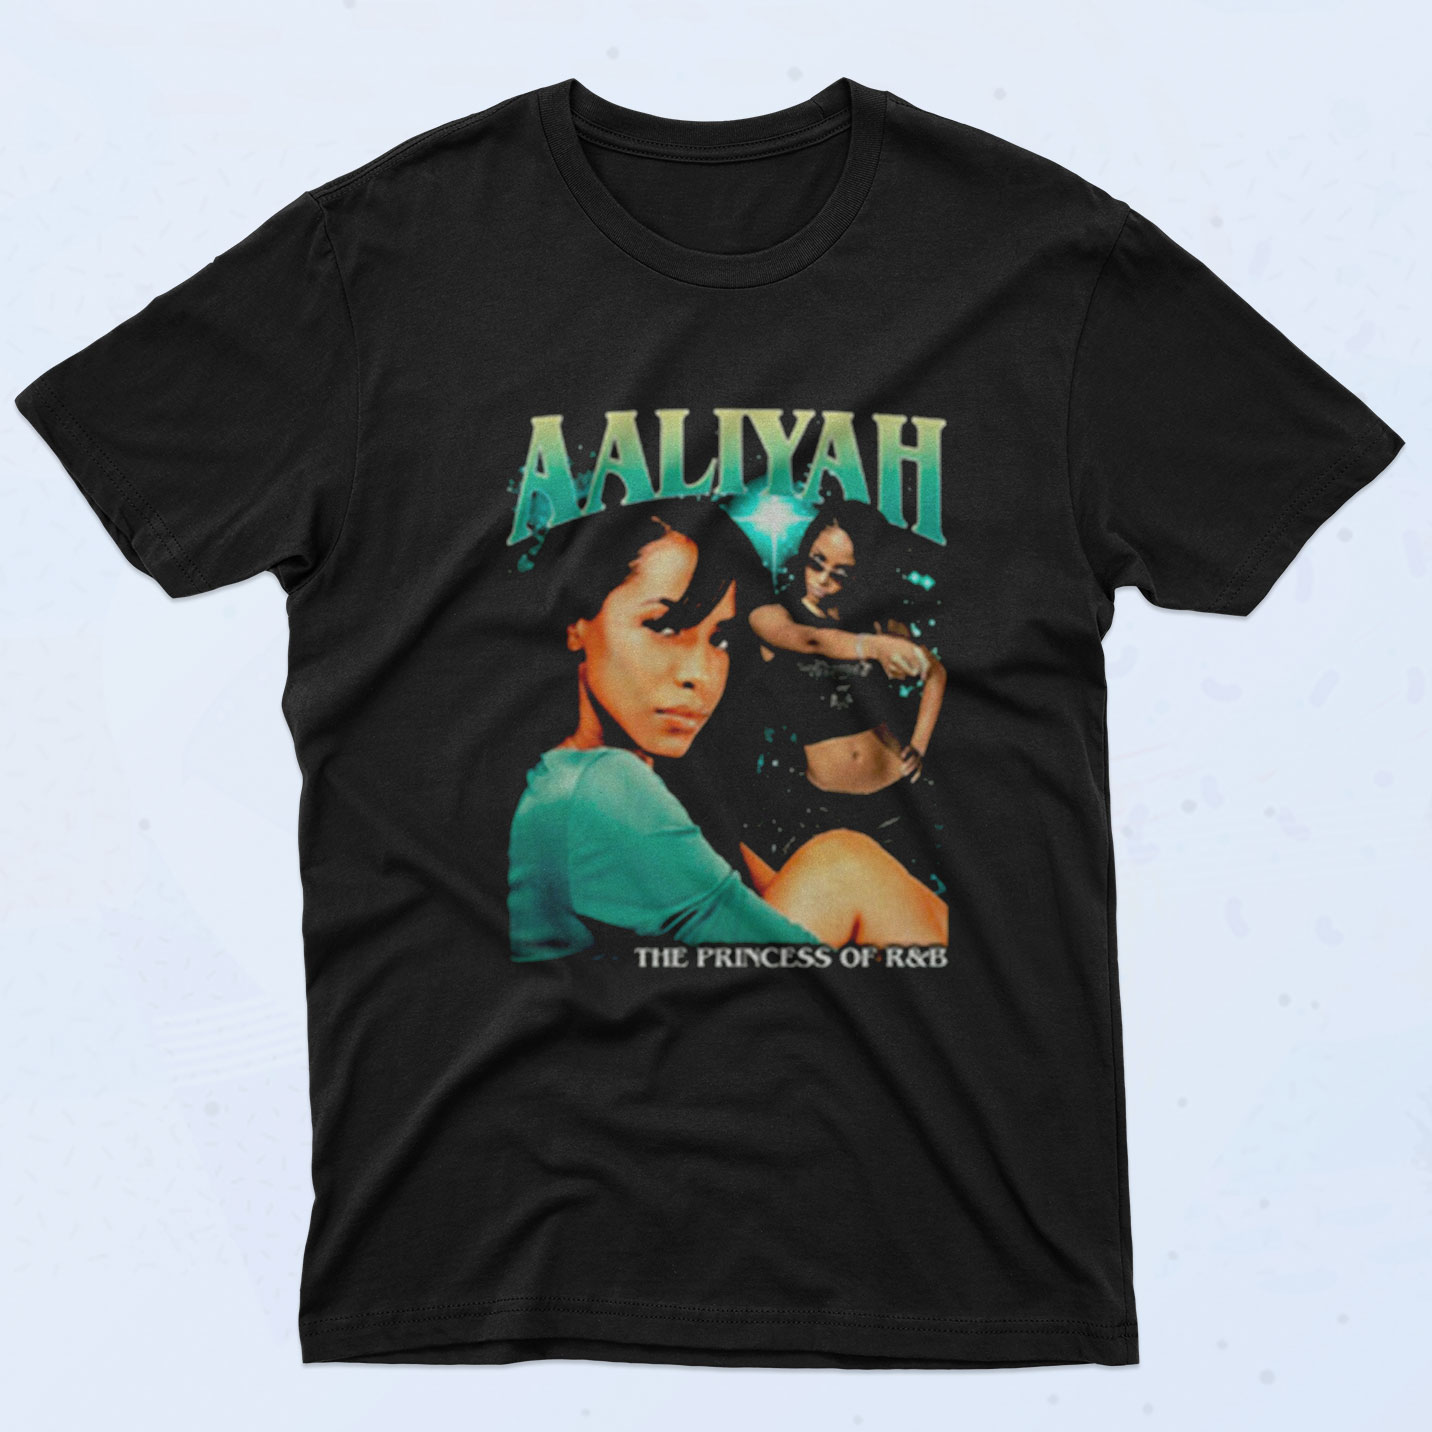 Vintage Aaliyah The Princess Of R&b 90s T Shirt Style - 90sclothes.com